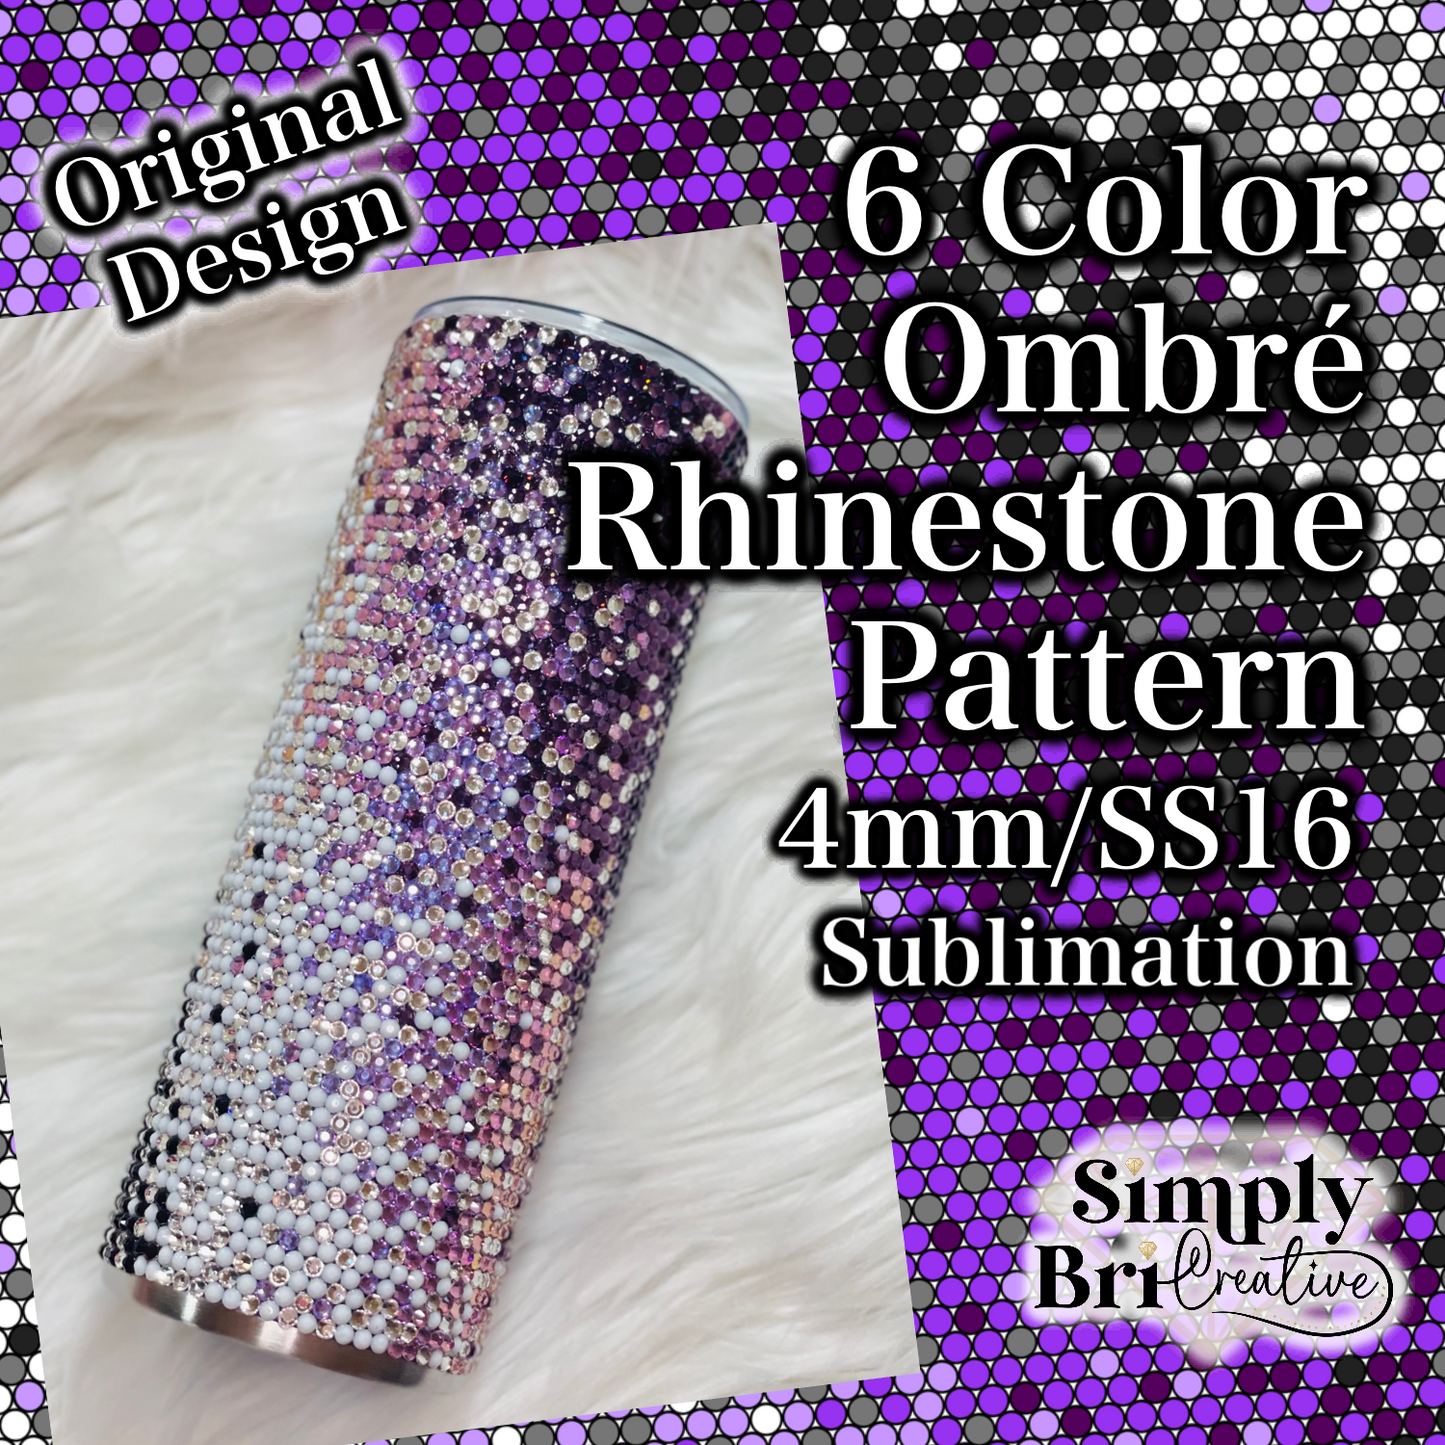 6 Color Ombre Sublimation Rhinestone Pattern (4mm/SS16)